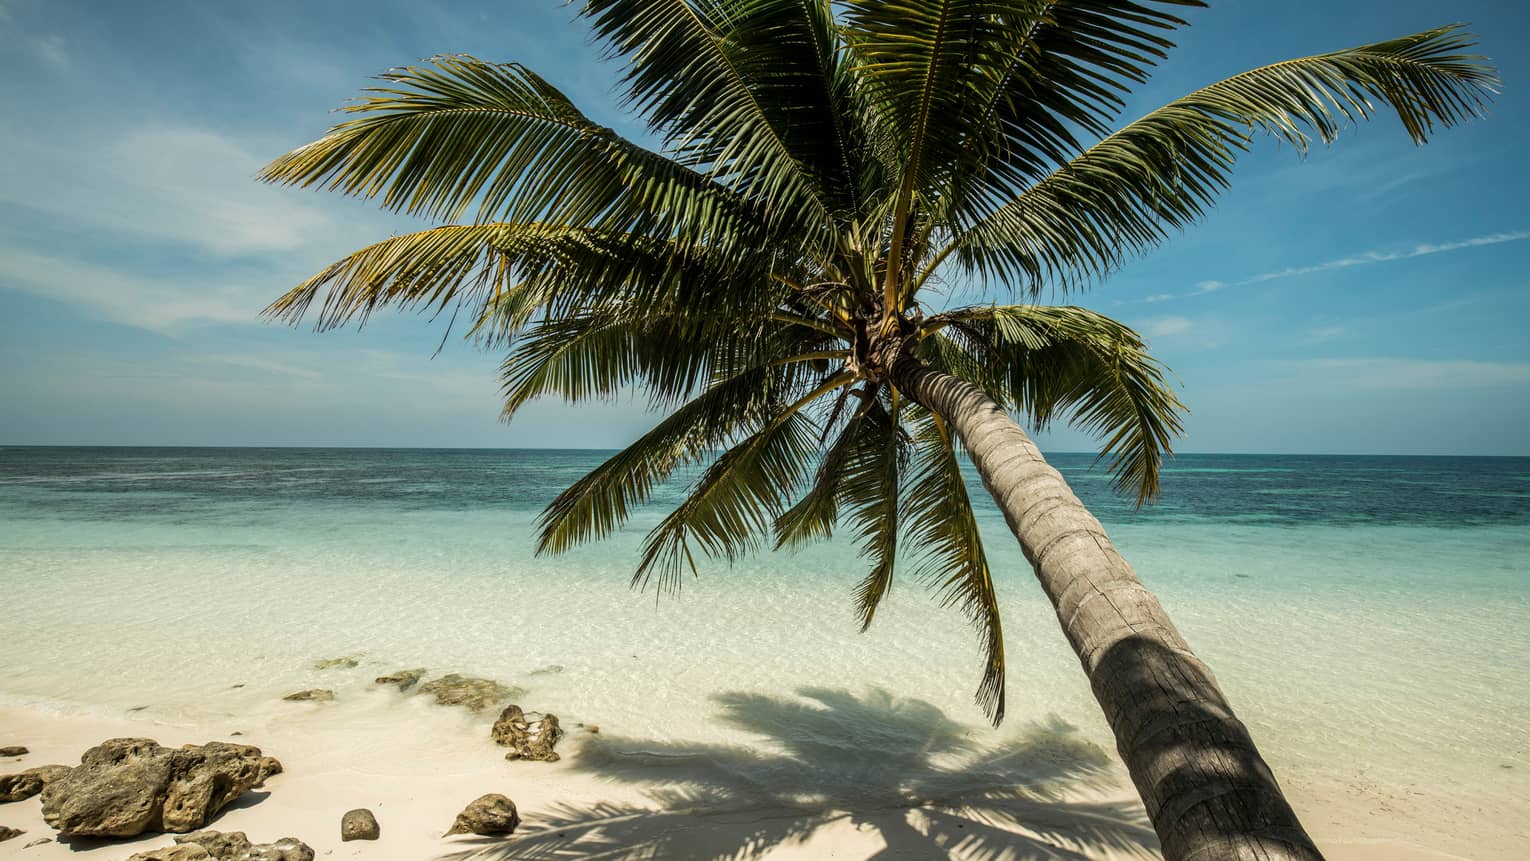 Long palm tree stretches over white sand beach and blue water